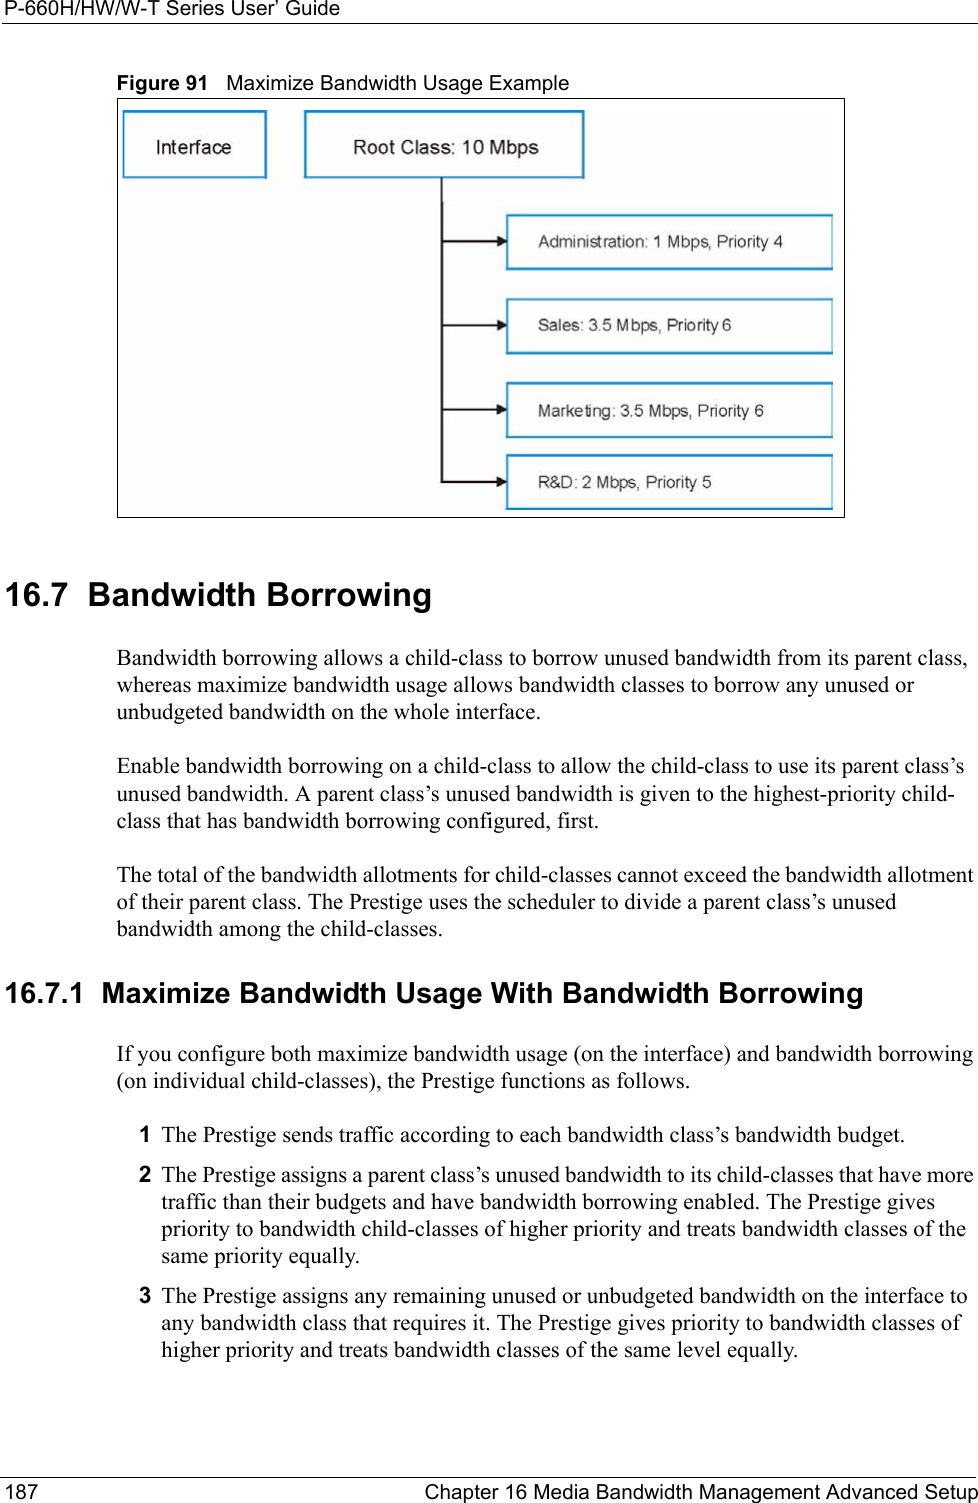 P-660H/HW/W-T Series User’ Guide187 Chapter 16 Media Bandwidth Management Advanced SetupFigure 91   Maximize Bandwidth Usage Example16.7  Bandwidth BorrowingBandwidth borrowing allows a child-class to borrow unused bandwidth from its parent class, whereas maximize bandwidth usage allows bandwidth classes to borrow any unused or unbudgeted bandwidth on the whole interface.Enable bandwidth borrowing on a child-class to allow the child-class to use its parent class’s unused bandwidth. A parent class’s unused bandwidth is given to the highest-priority child-class that has bandwidth borrowing configured, first.The total of the bandwidth allotments for child-classes cannot exceed the bandwidth allotment of their parent class. The Prestige uses the scheduler to divide a parent class’s unused bandwidth among the child-classes. 16.7.1  Maximize Bandwidth Usage With Bandwidth BorrowingIf you configure both maximize bandwidth usage (on the interface) and bandwidth borrowing (on individual child-classes), the Prestige functions as follows.1The Prestige sends traffic according to each bandwidth class’s bandwidth budget.2The Prestige assigns a parent class’s unused bandwidth to its child-classes that have more traffic than their budgets and have bandwidth borrowing enabled. The Prestige gives priority to bandwidth child-classes of higher priority and treats bandwidth classes of the same priority equally.3The Prestige assigns any remaining unused or unbudgeted bandwidth on the interface to any bandwidth class that requires it. The Prestige gives priority to bandwidth classes of higher priority and treats bandwidth classes of the same level equally.